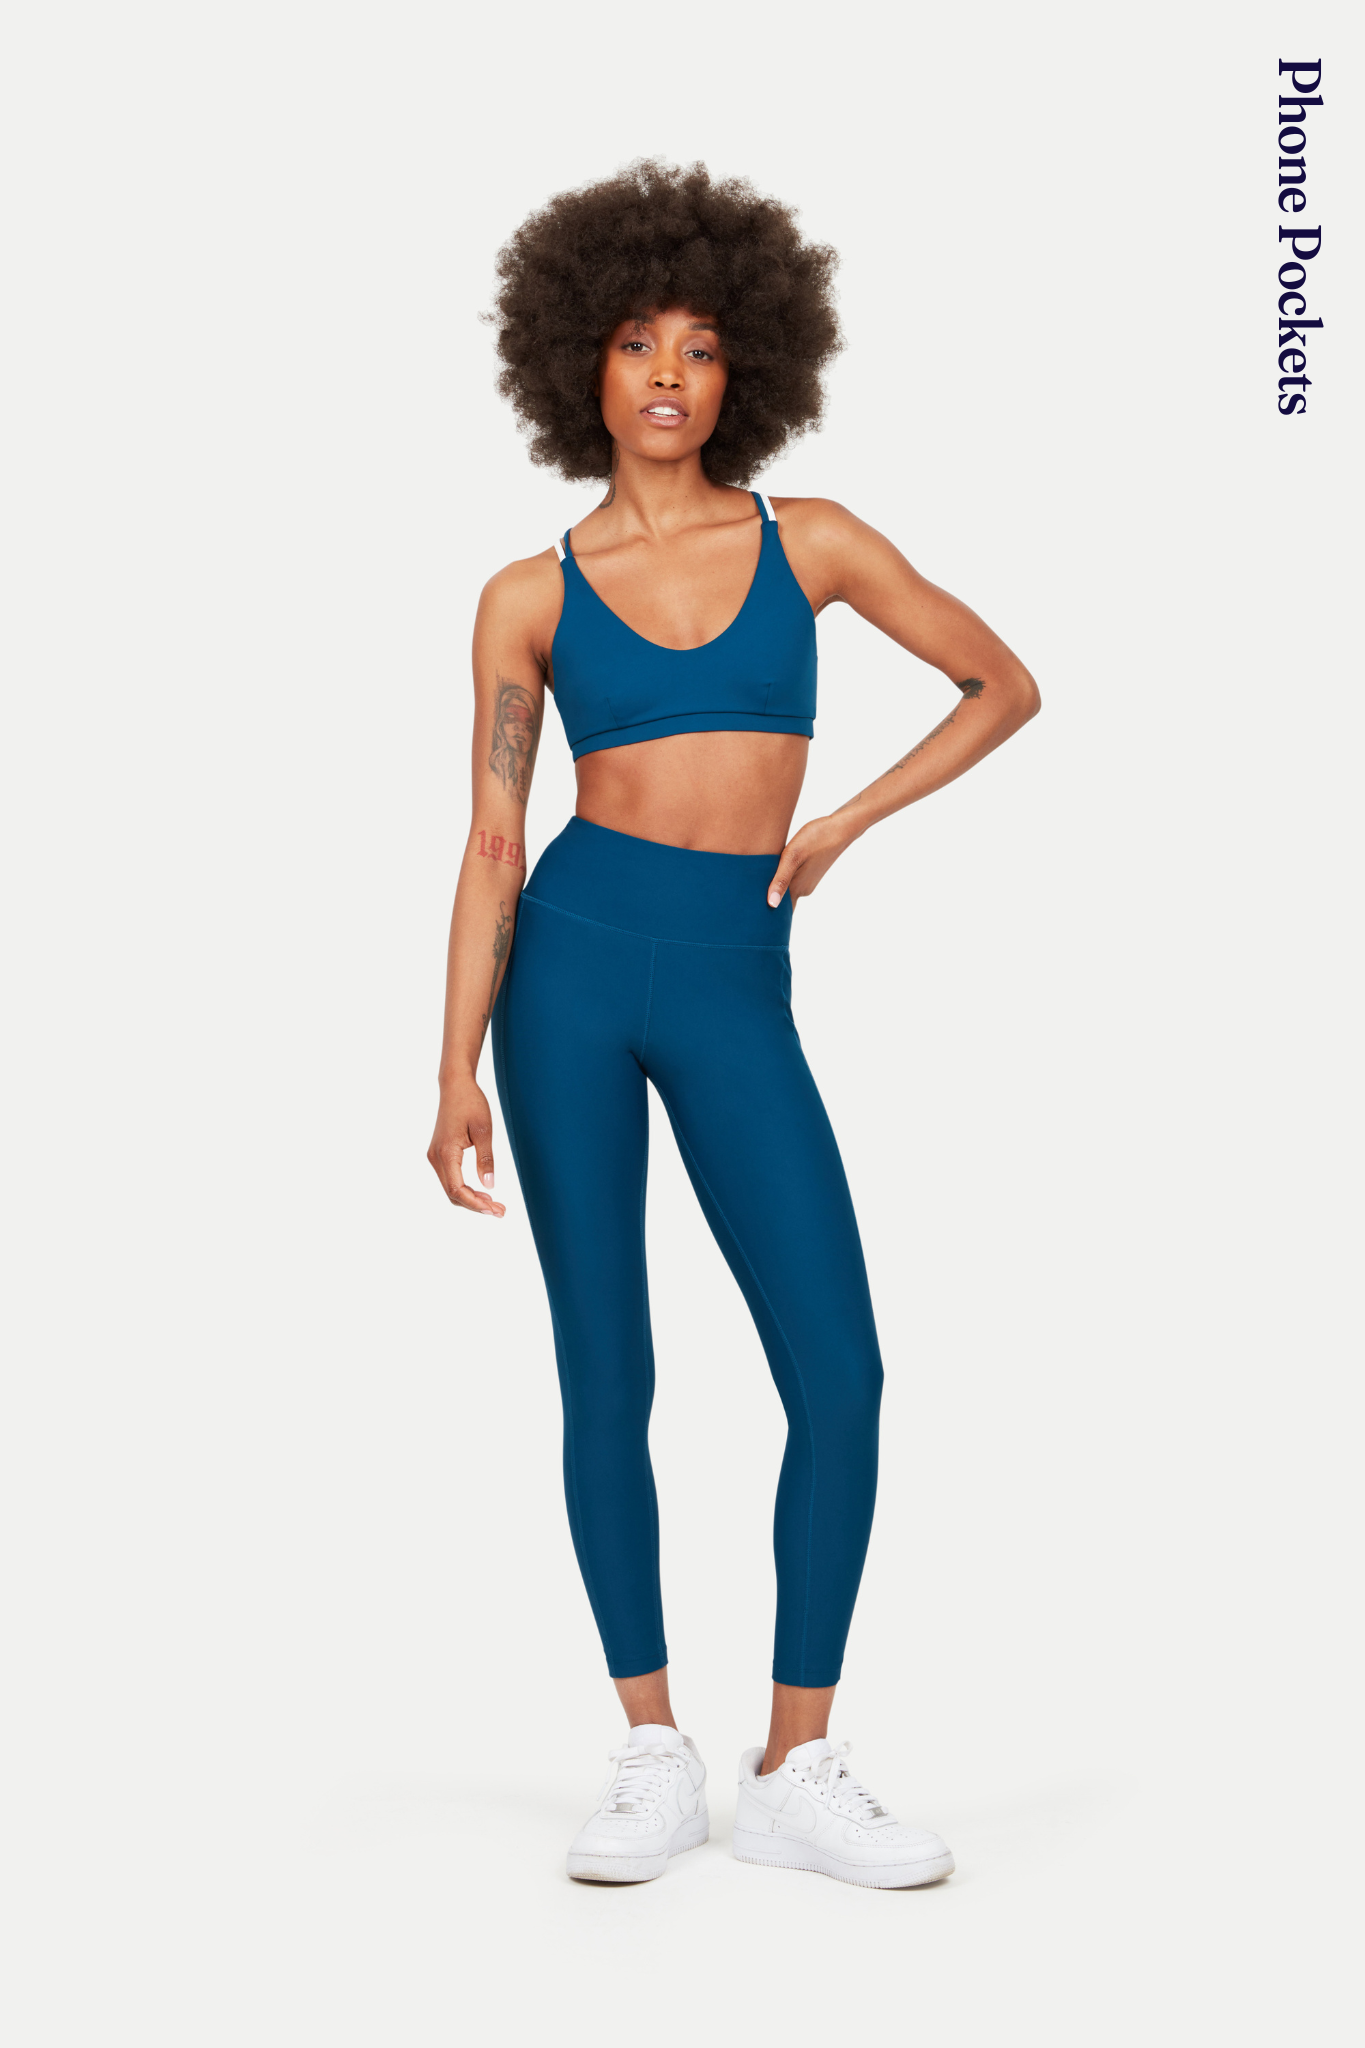 Marks and Spencer's 'super comfortable' gym leggings with 'pocket for  phone' - Liverpool Echo